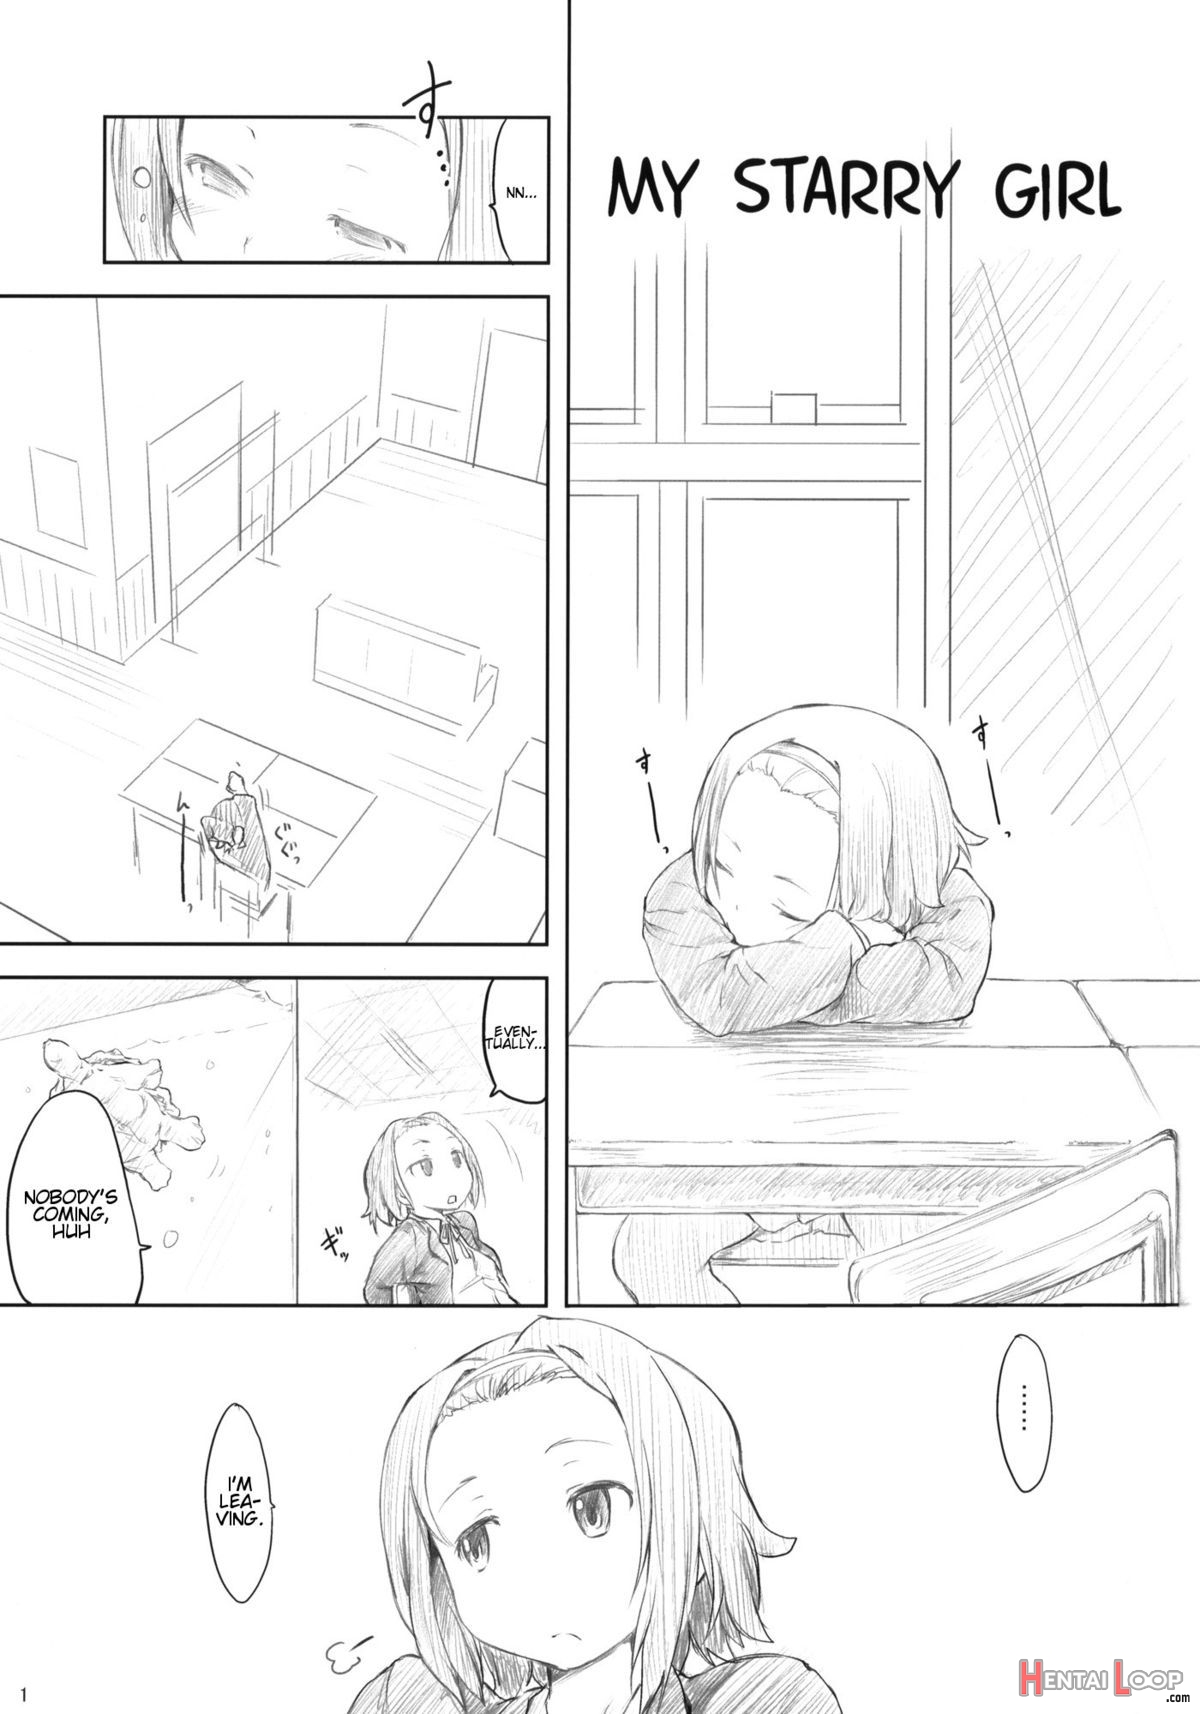 My Starry Girl page 2